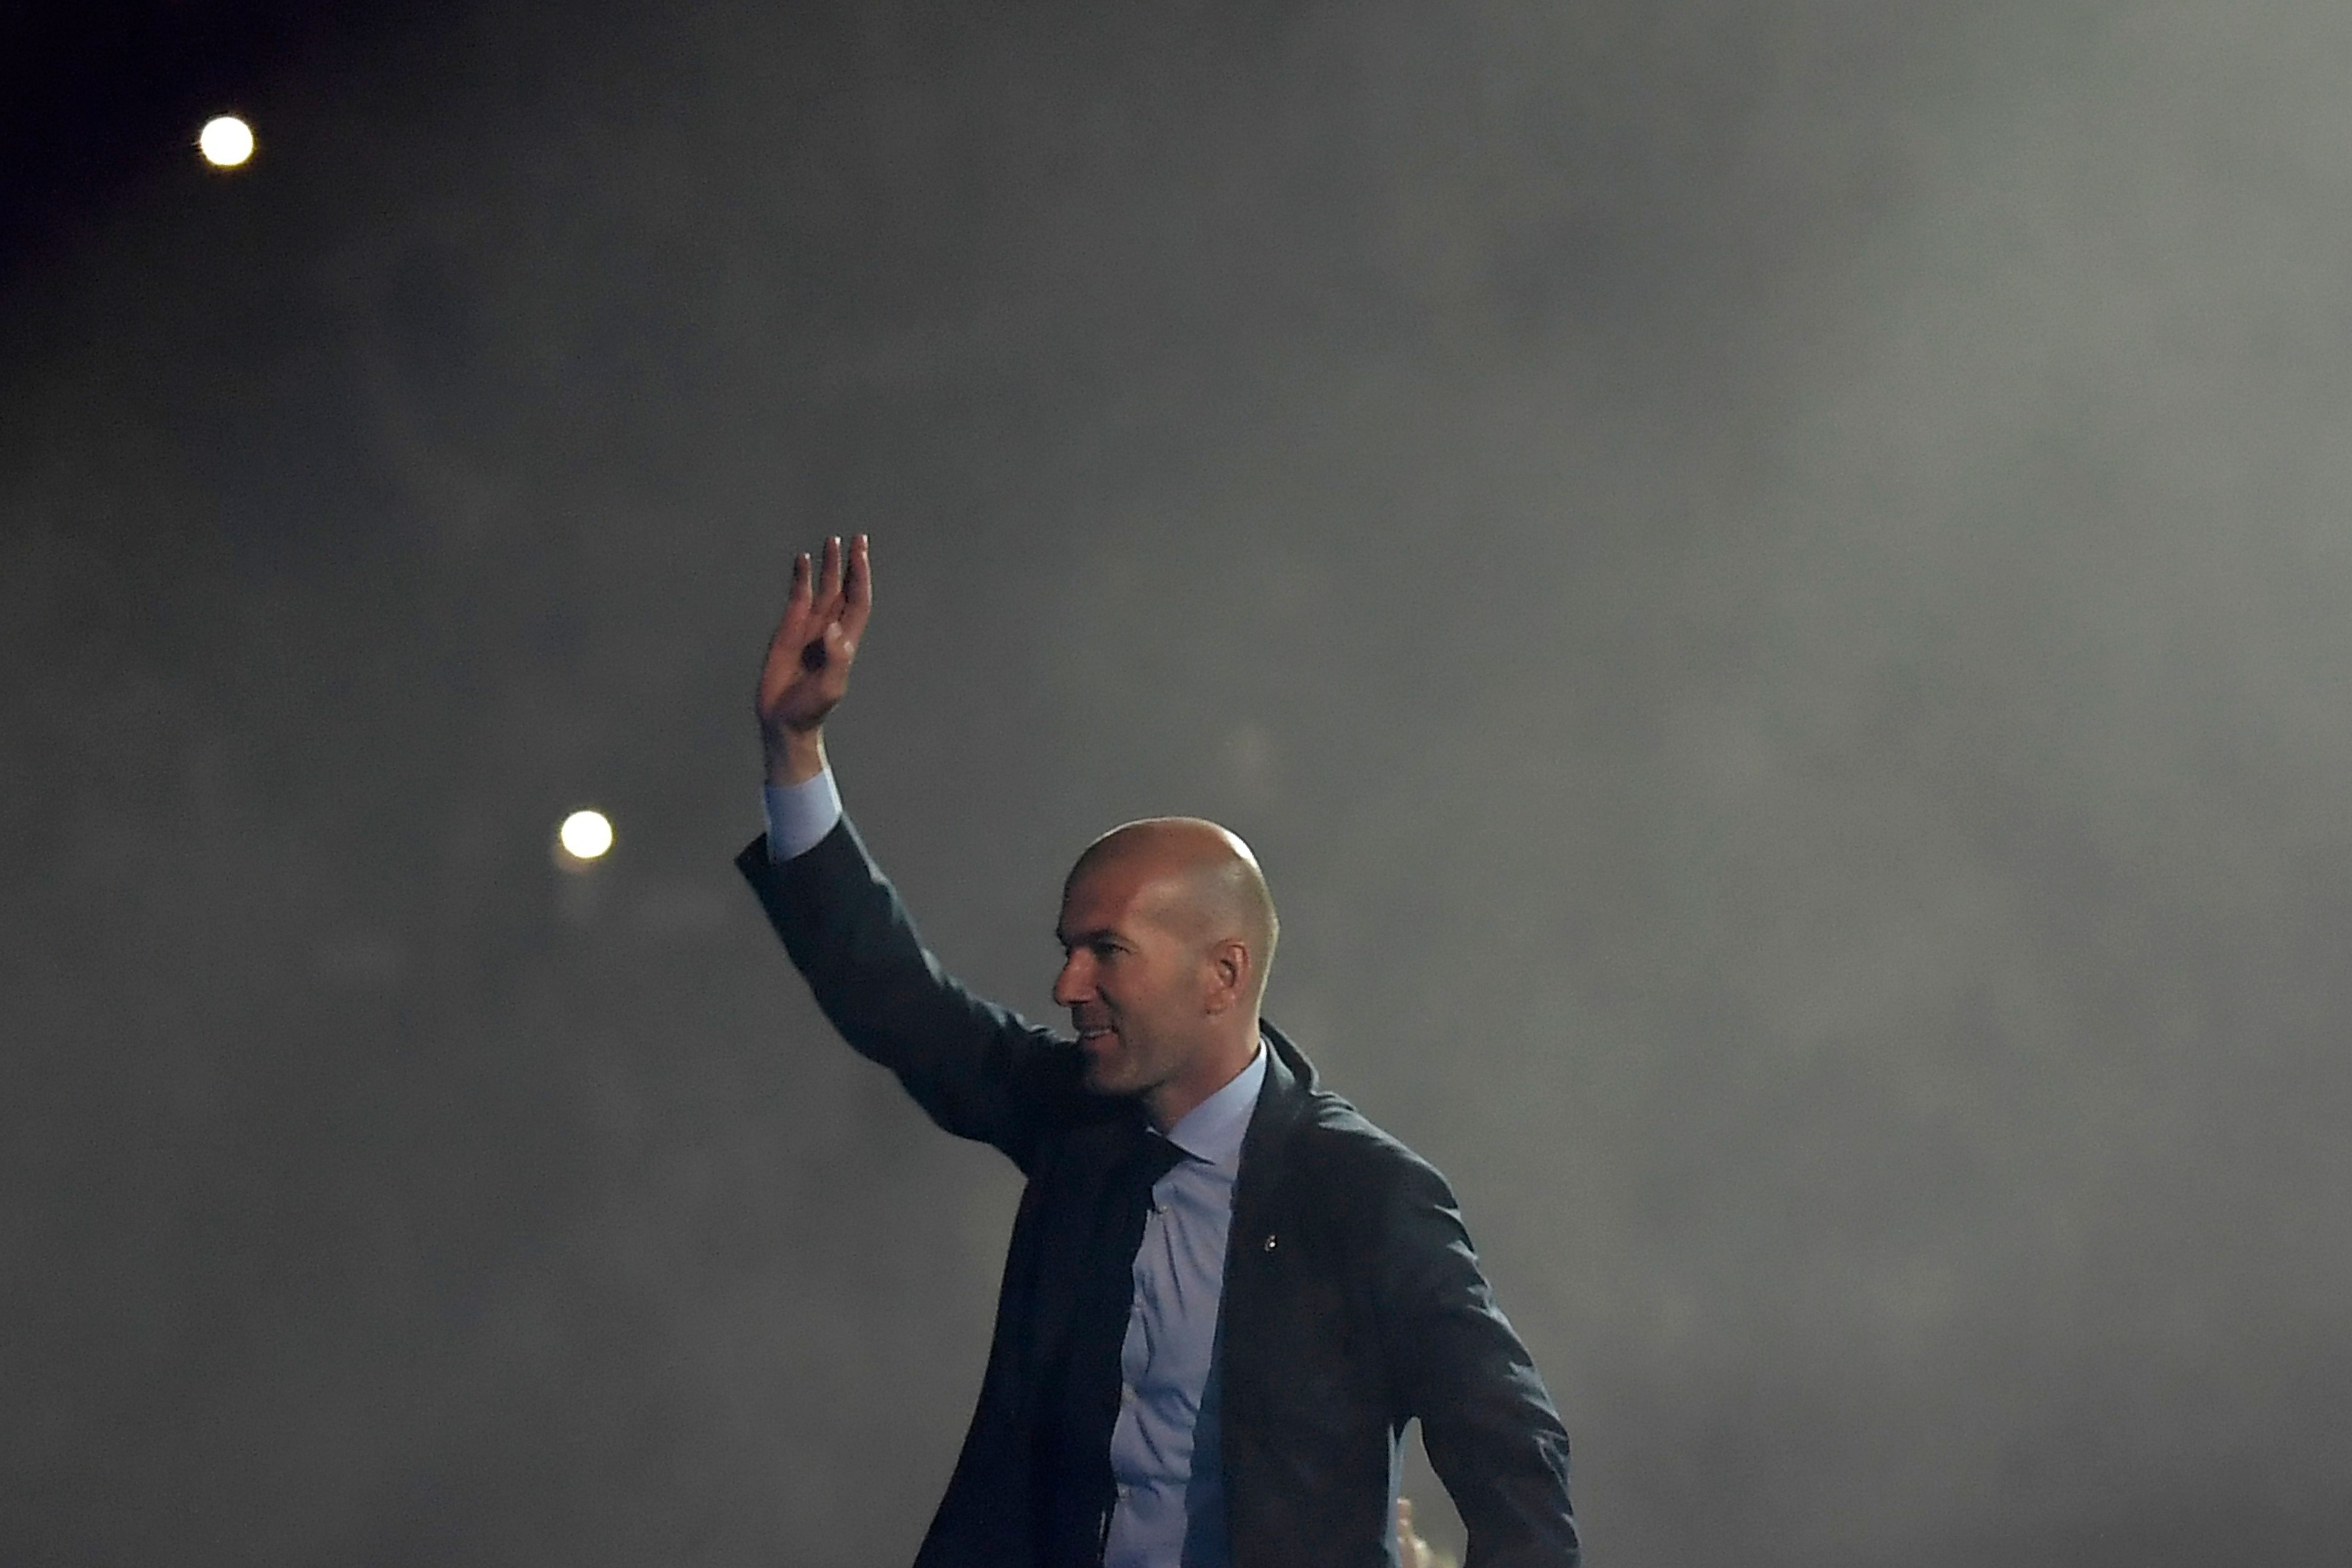 Zinedine Zidane returned to the helm at Real Madrid less than one year after bidding goodbye to the club. (Photo by Oscar del Pozo/AFP/Getty Images)